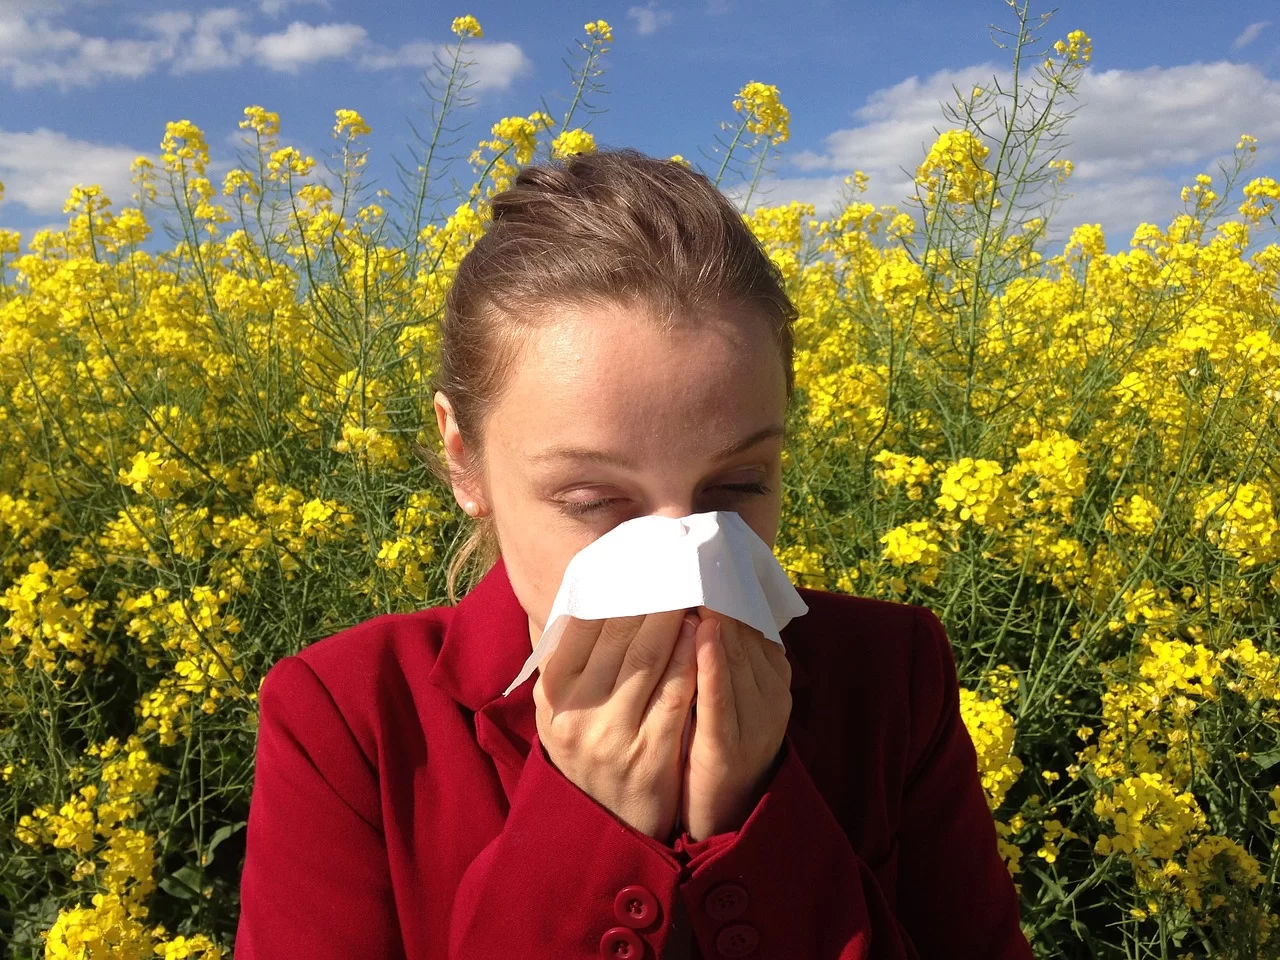 CHINESE MEDICINE HAY FEVER REMEDIES